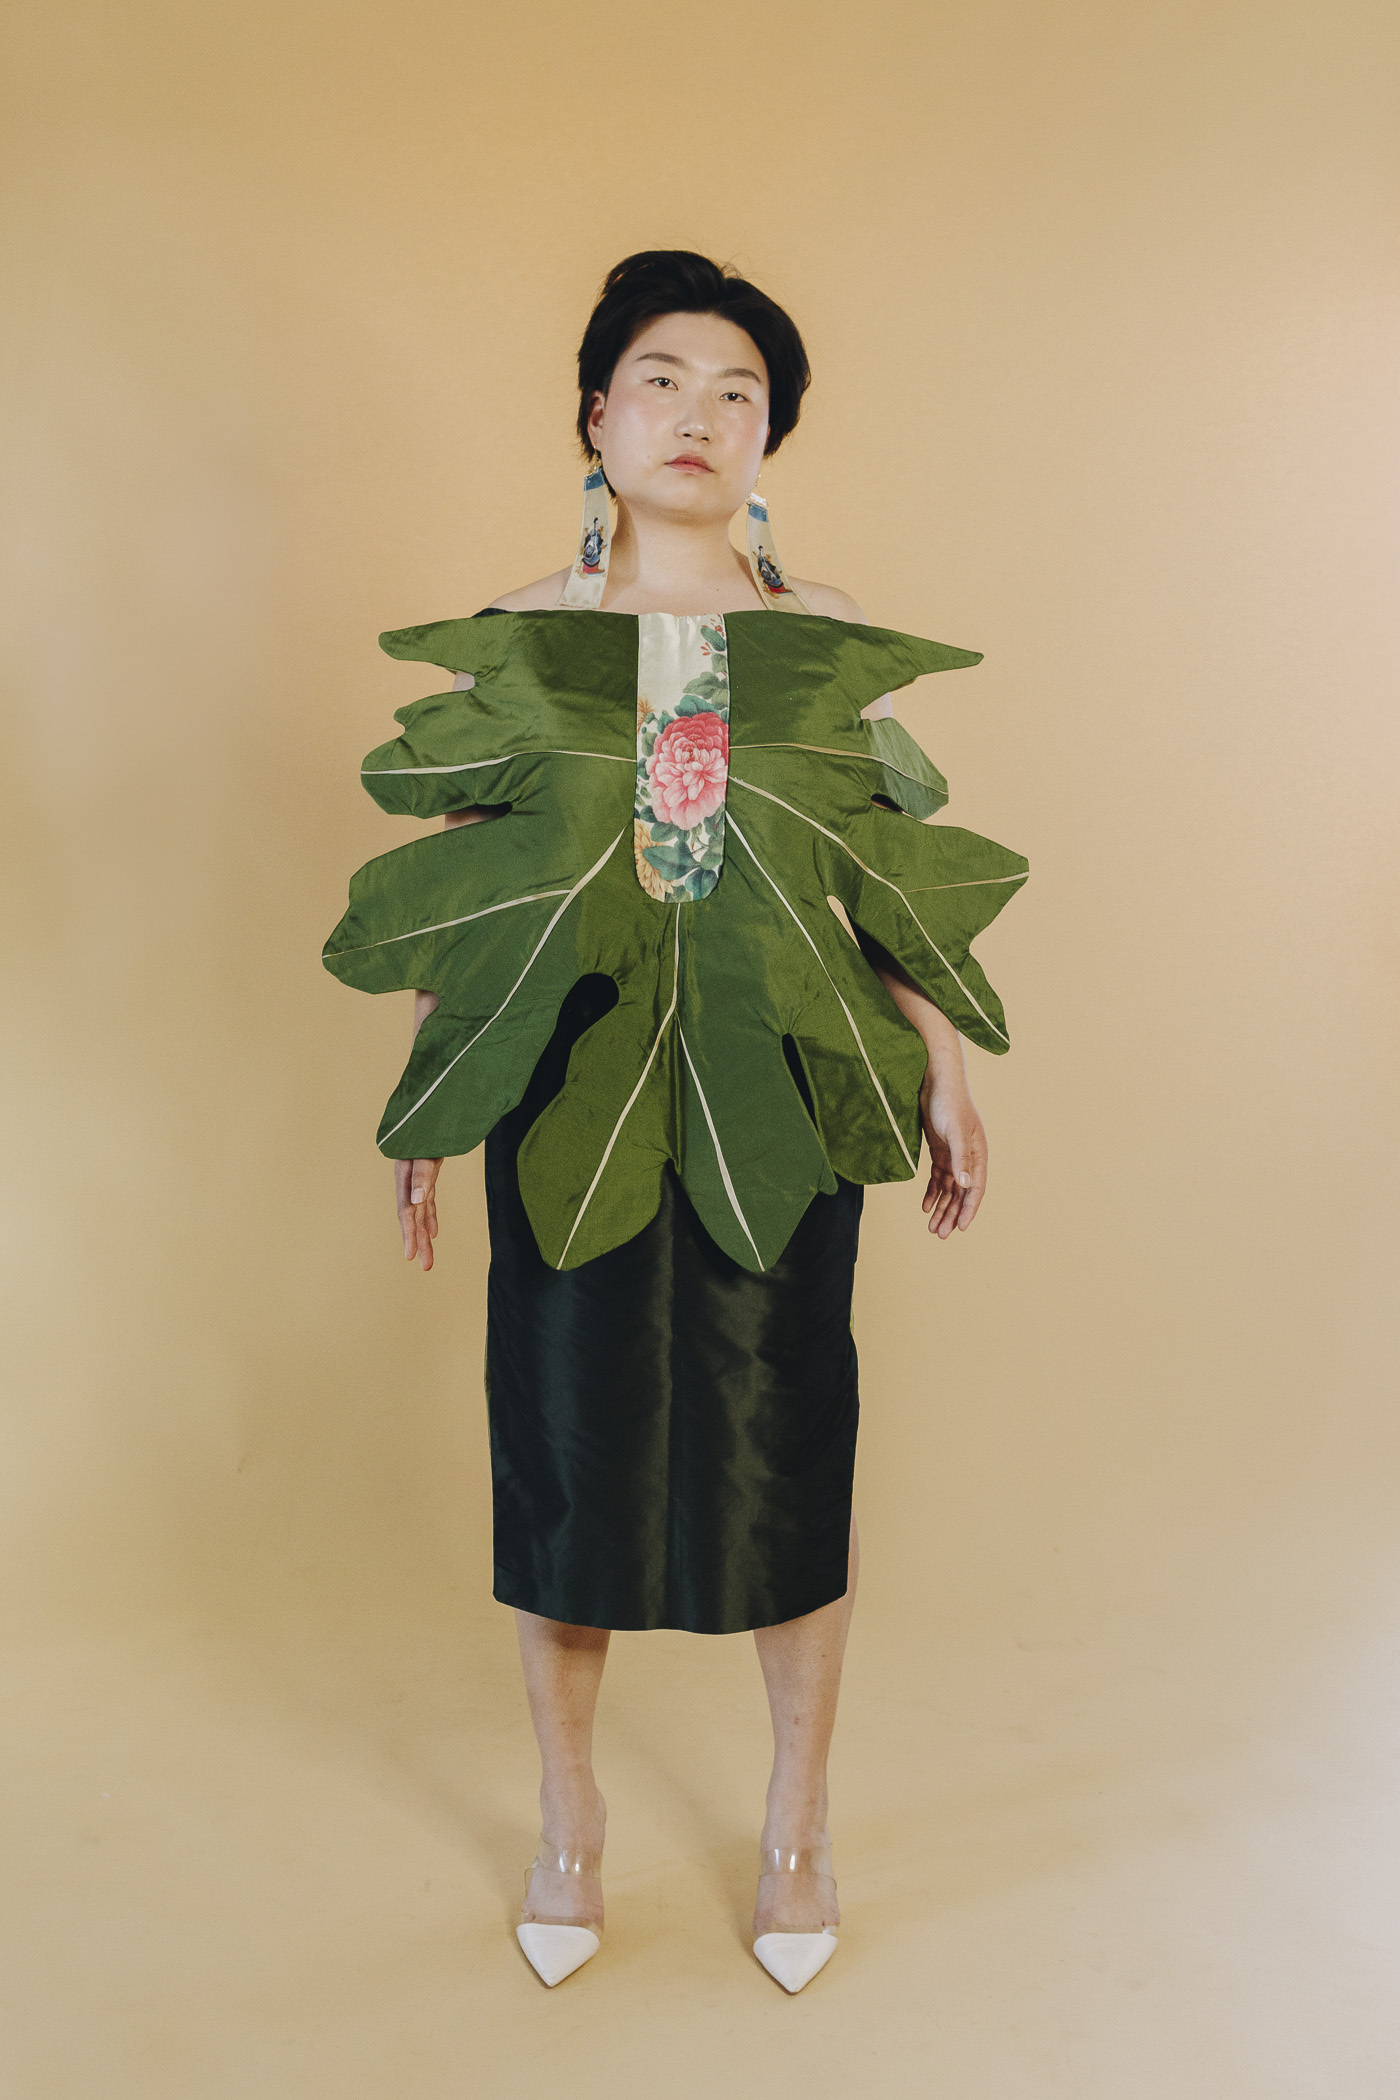 Dahn Bi wears a green dress with a large green leaf radiating out of the center